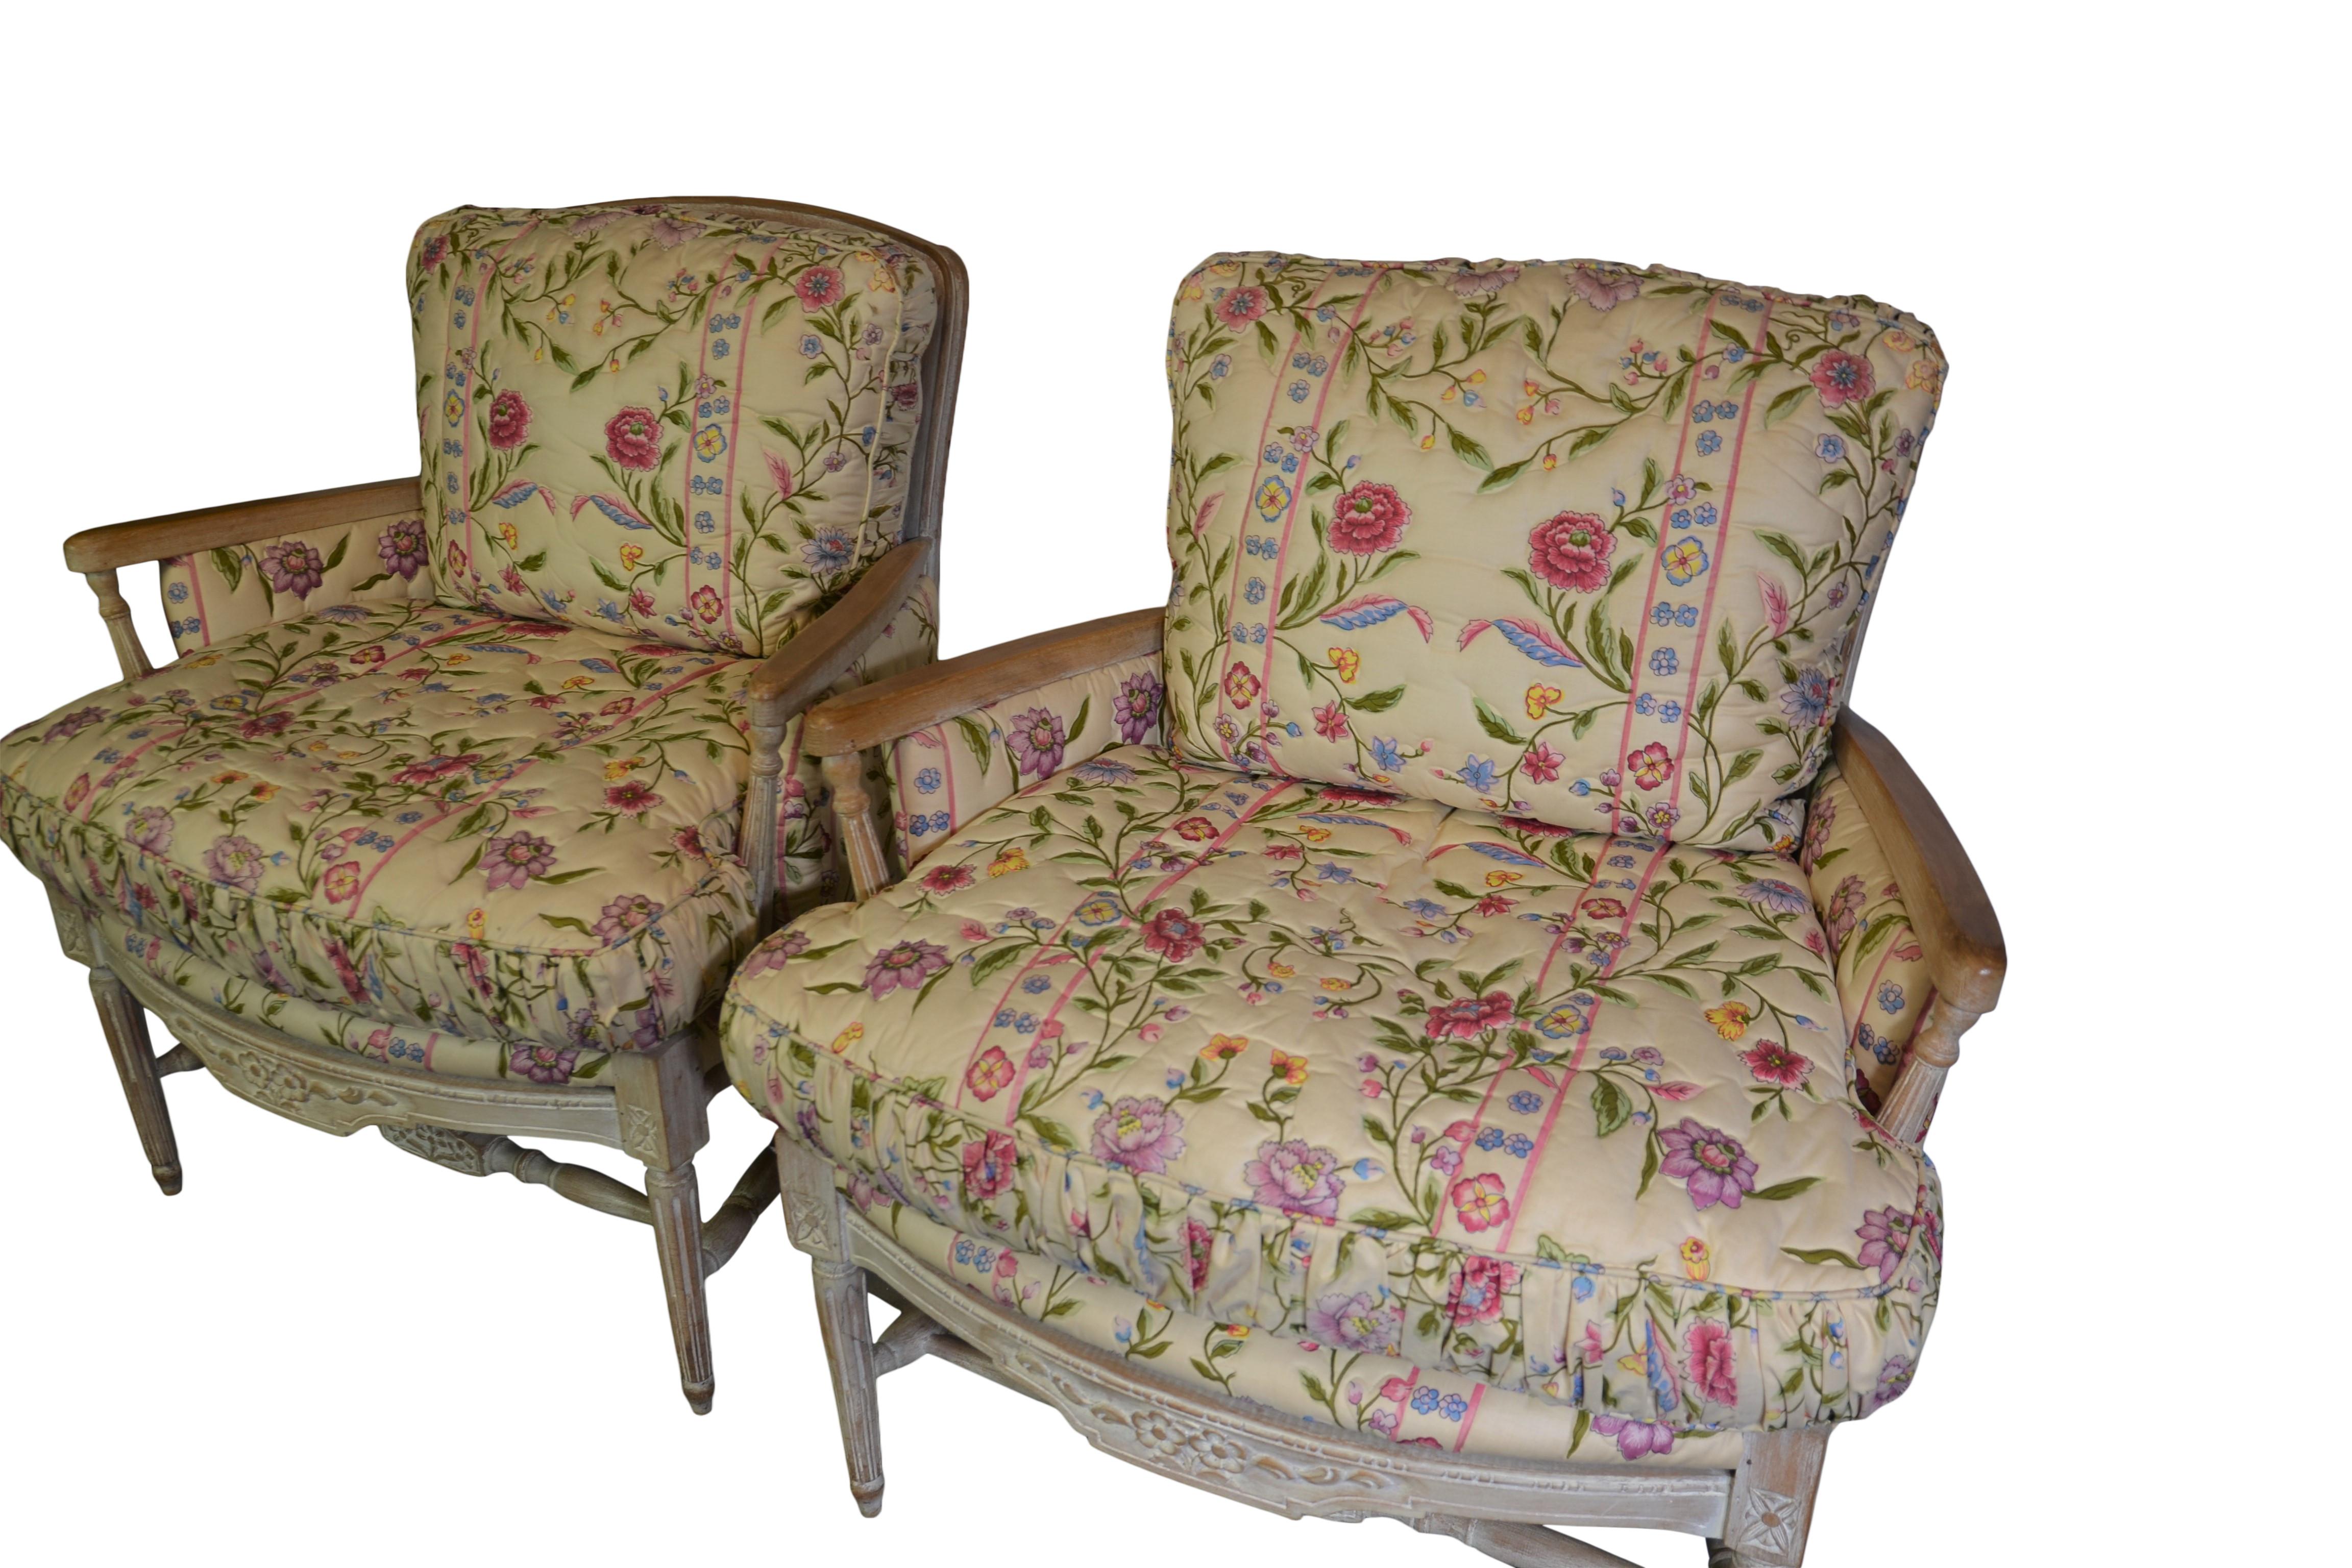 Louis XVI Style Ladder Back Armchairs Set of 2 In Distressed Condition For Sale In Pomona, CA